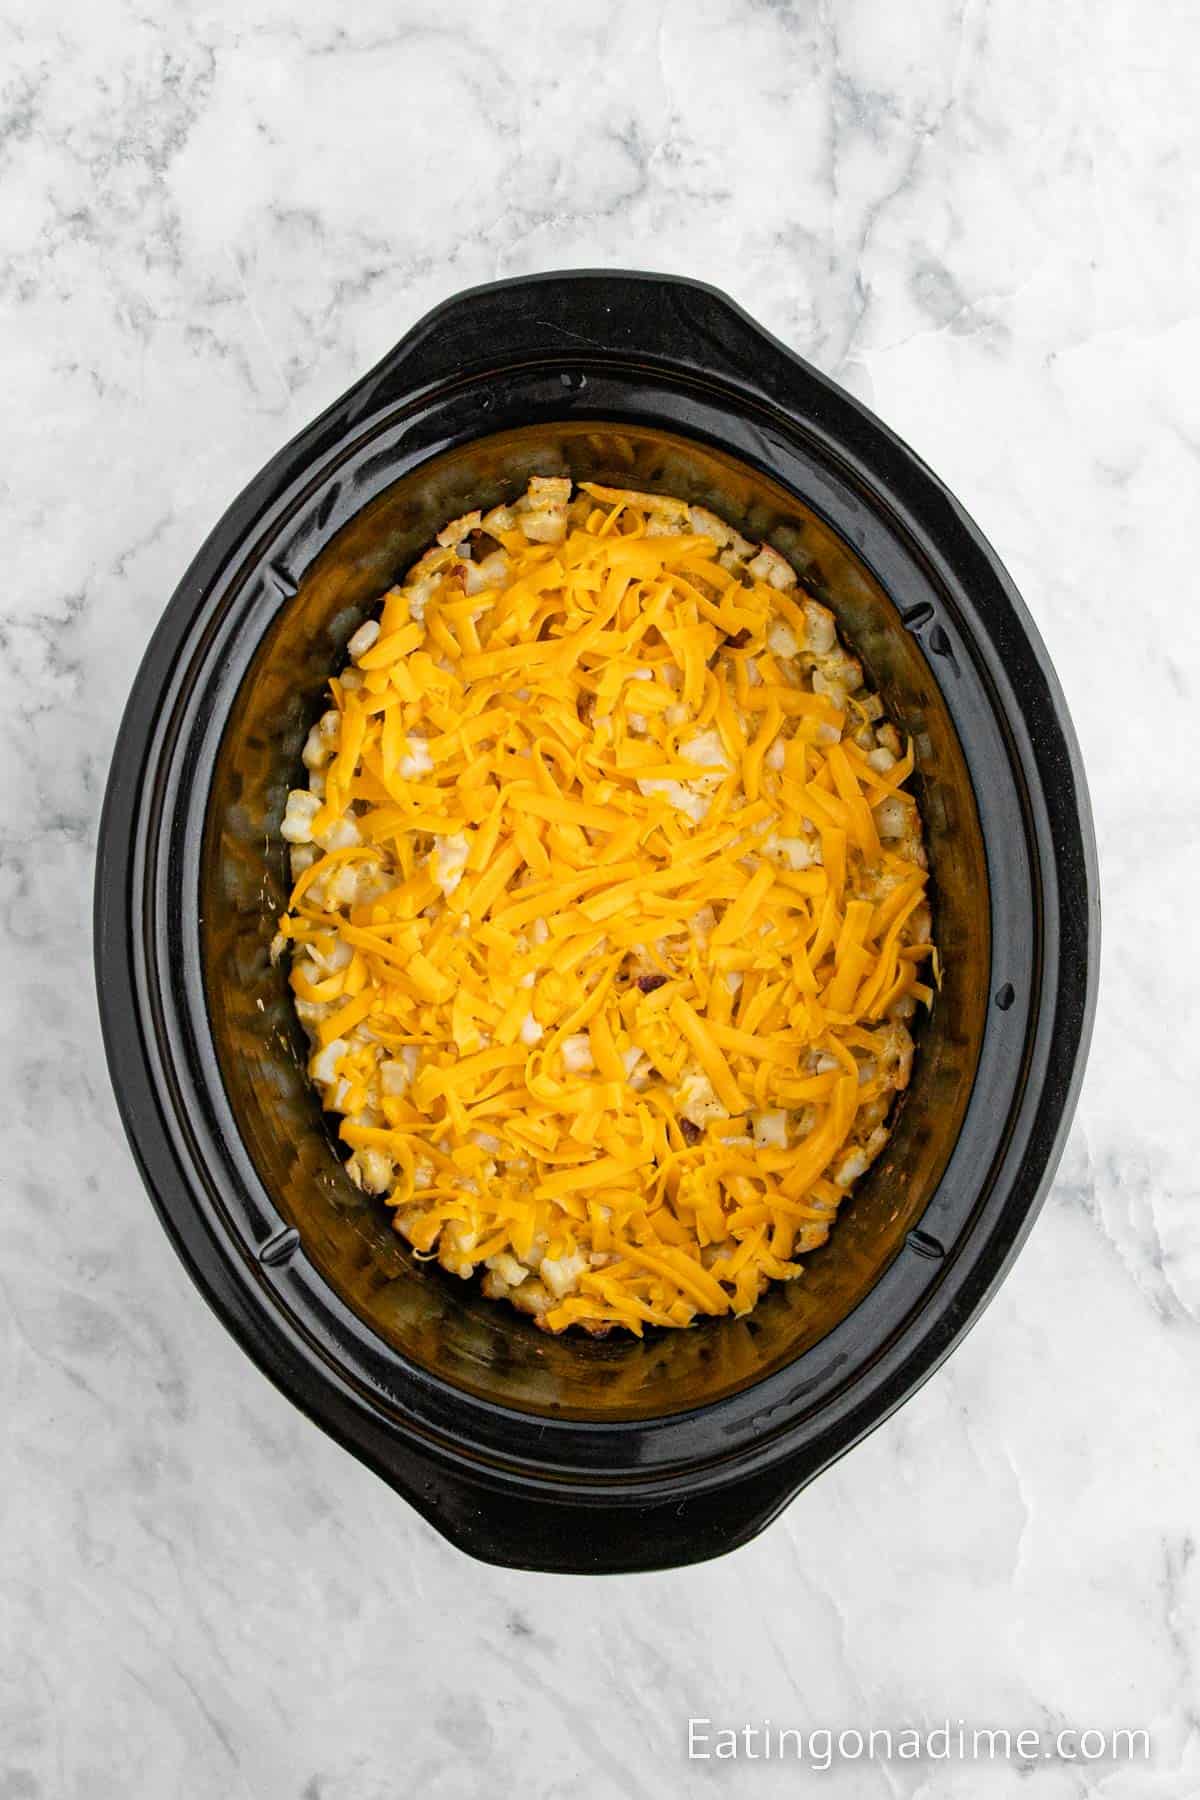 Top the hashbrown mixture with shredded cheese in the slow cooker